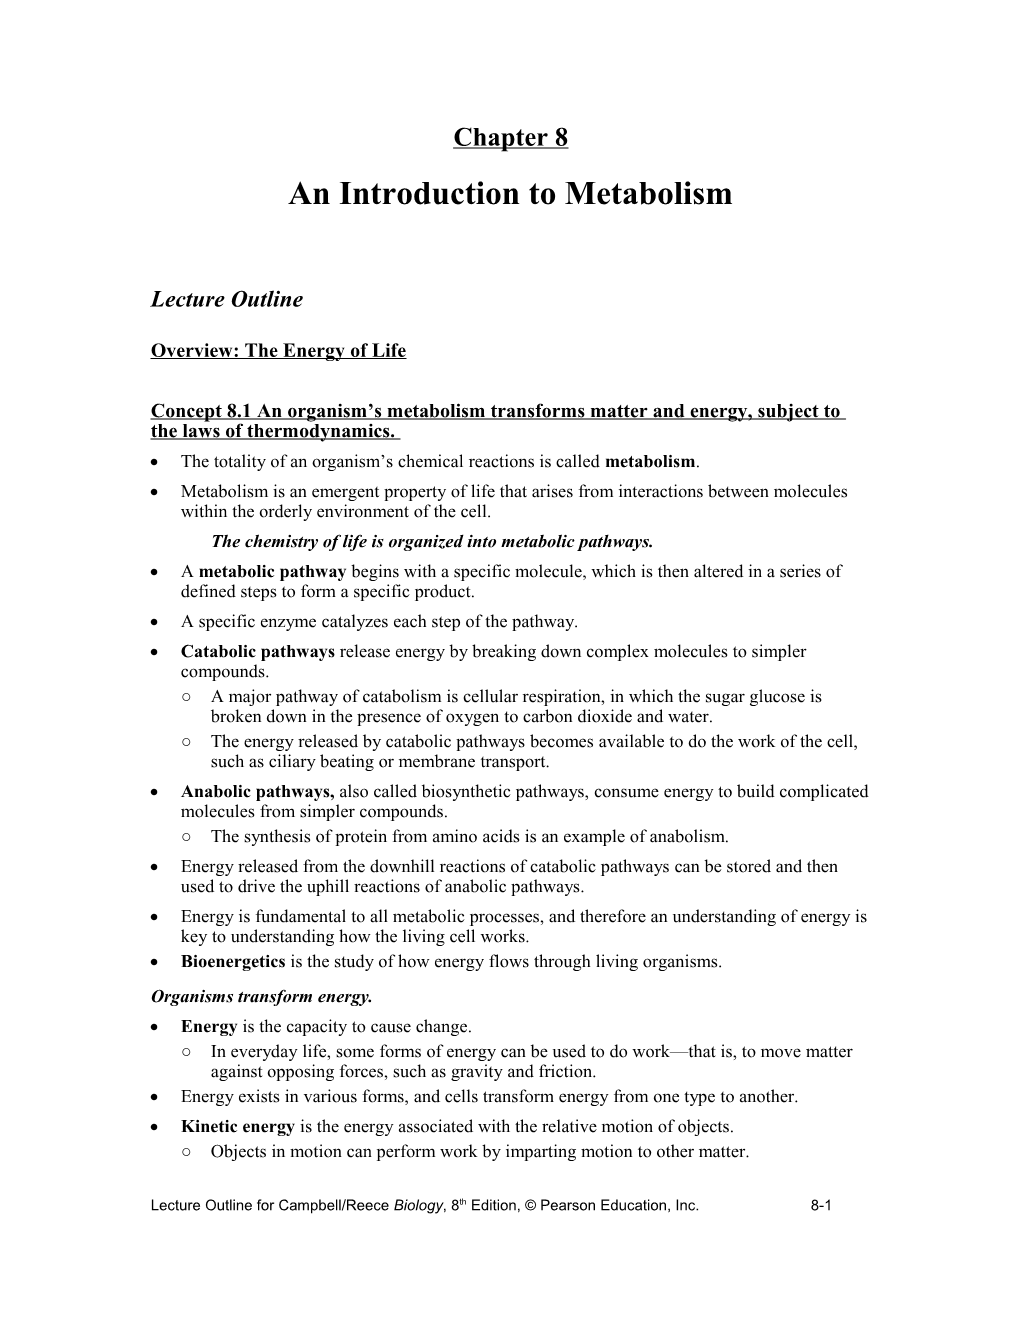 Chapter 6 an Introduction to Metabolism